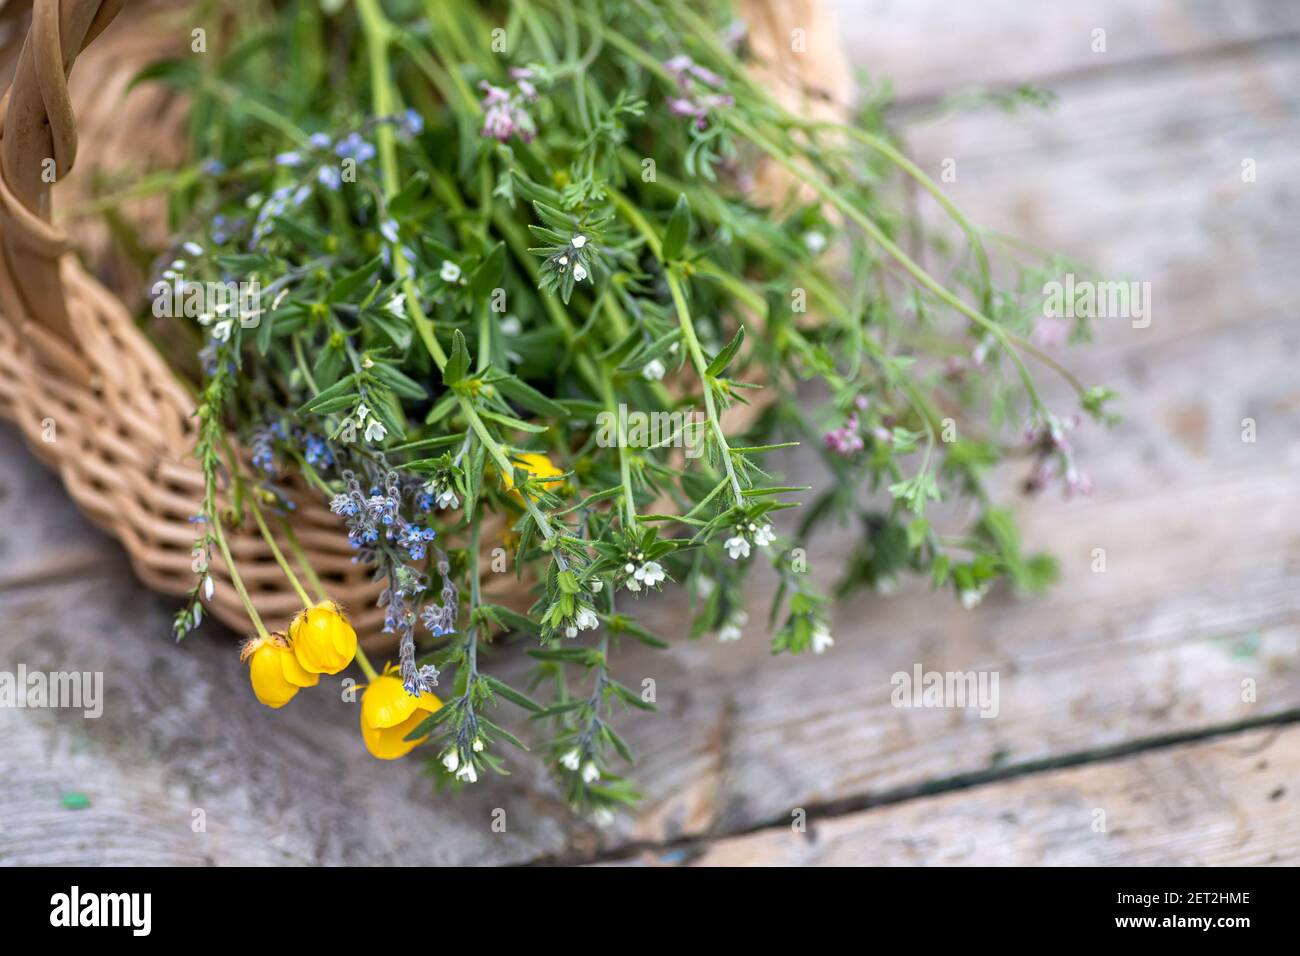 bouquet of medicinal plants in basket on a wooden table. Fumaria officinalis, Myosotis stricta, Ranunculus repens collected for preparation of potions Stock Photo